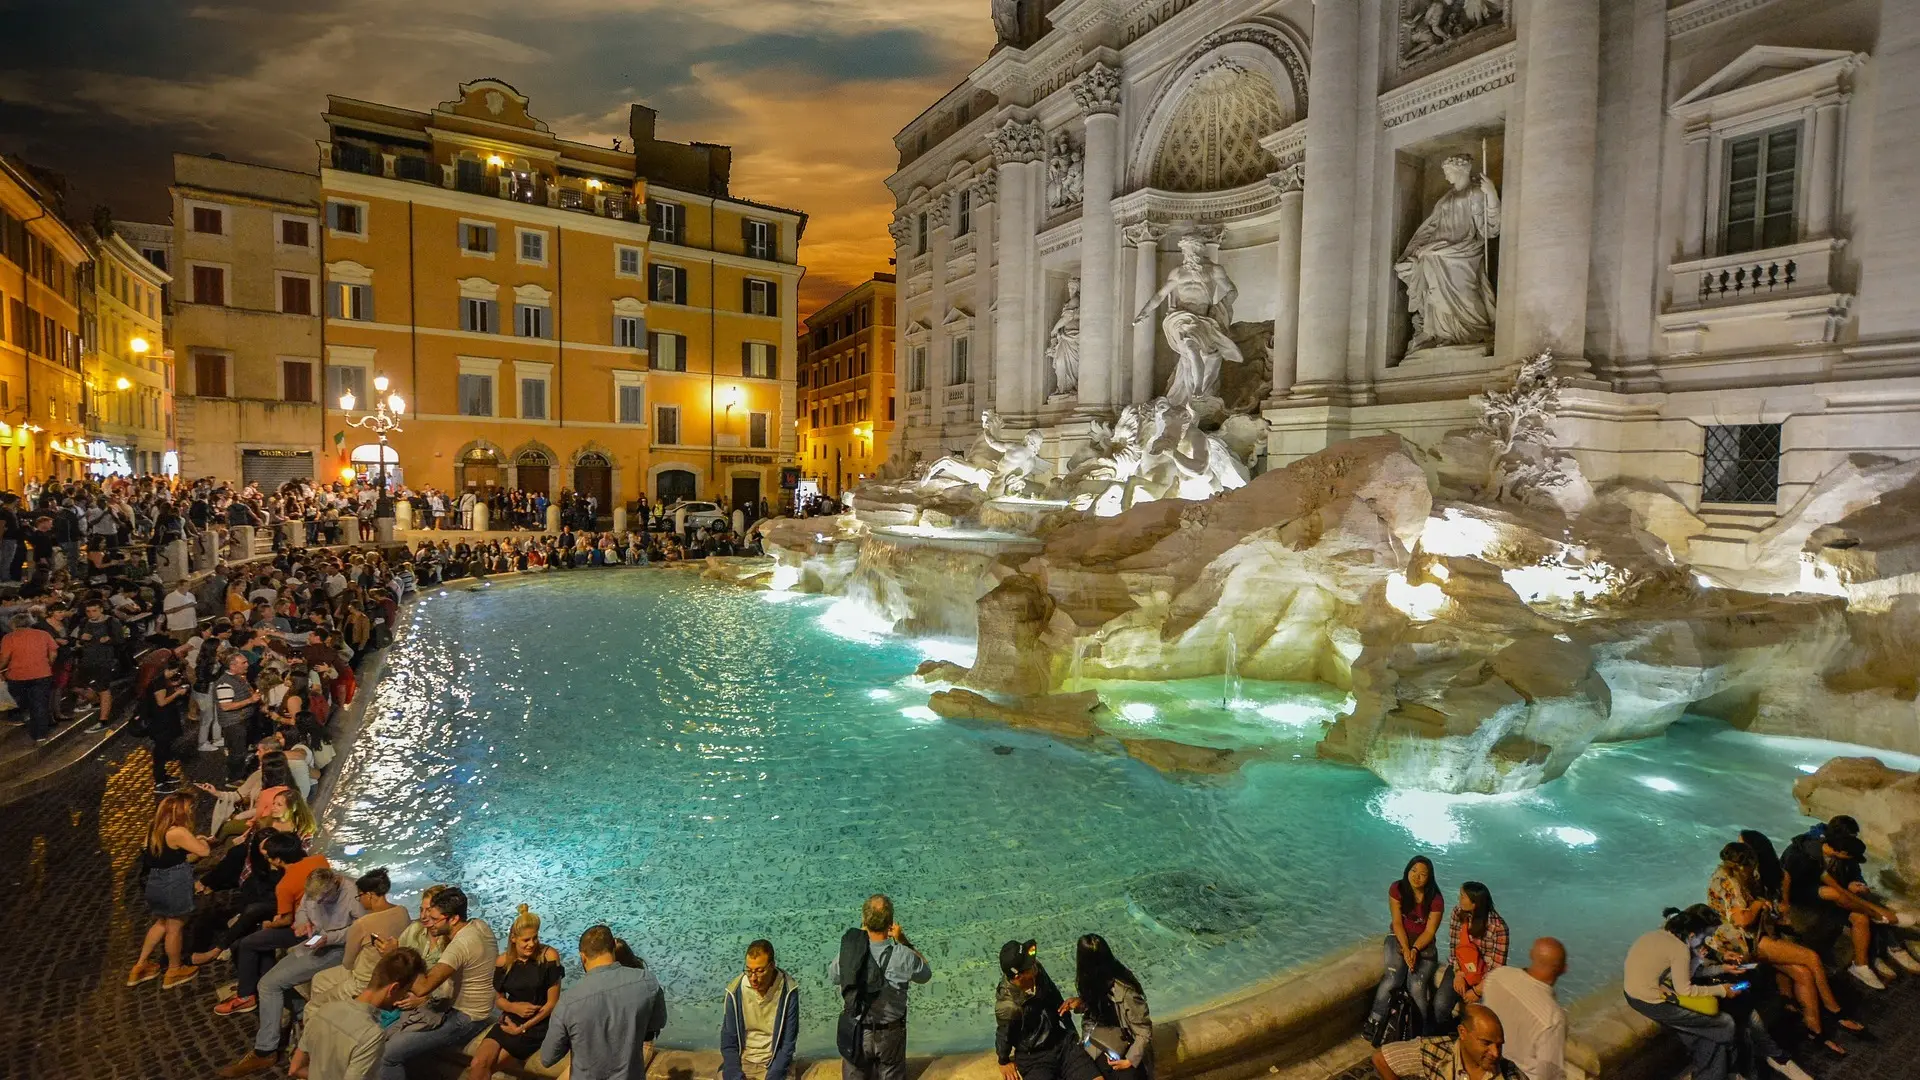 "Nighttime photo of the Trevi Fountain in Rome, showing its detailed sculptures and cascading water bathed in ambient light. Tourists are seen gathered around, some tossing coins, enjoying the fountain's beauty and the lively atmosphere under a starry sky."